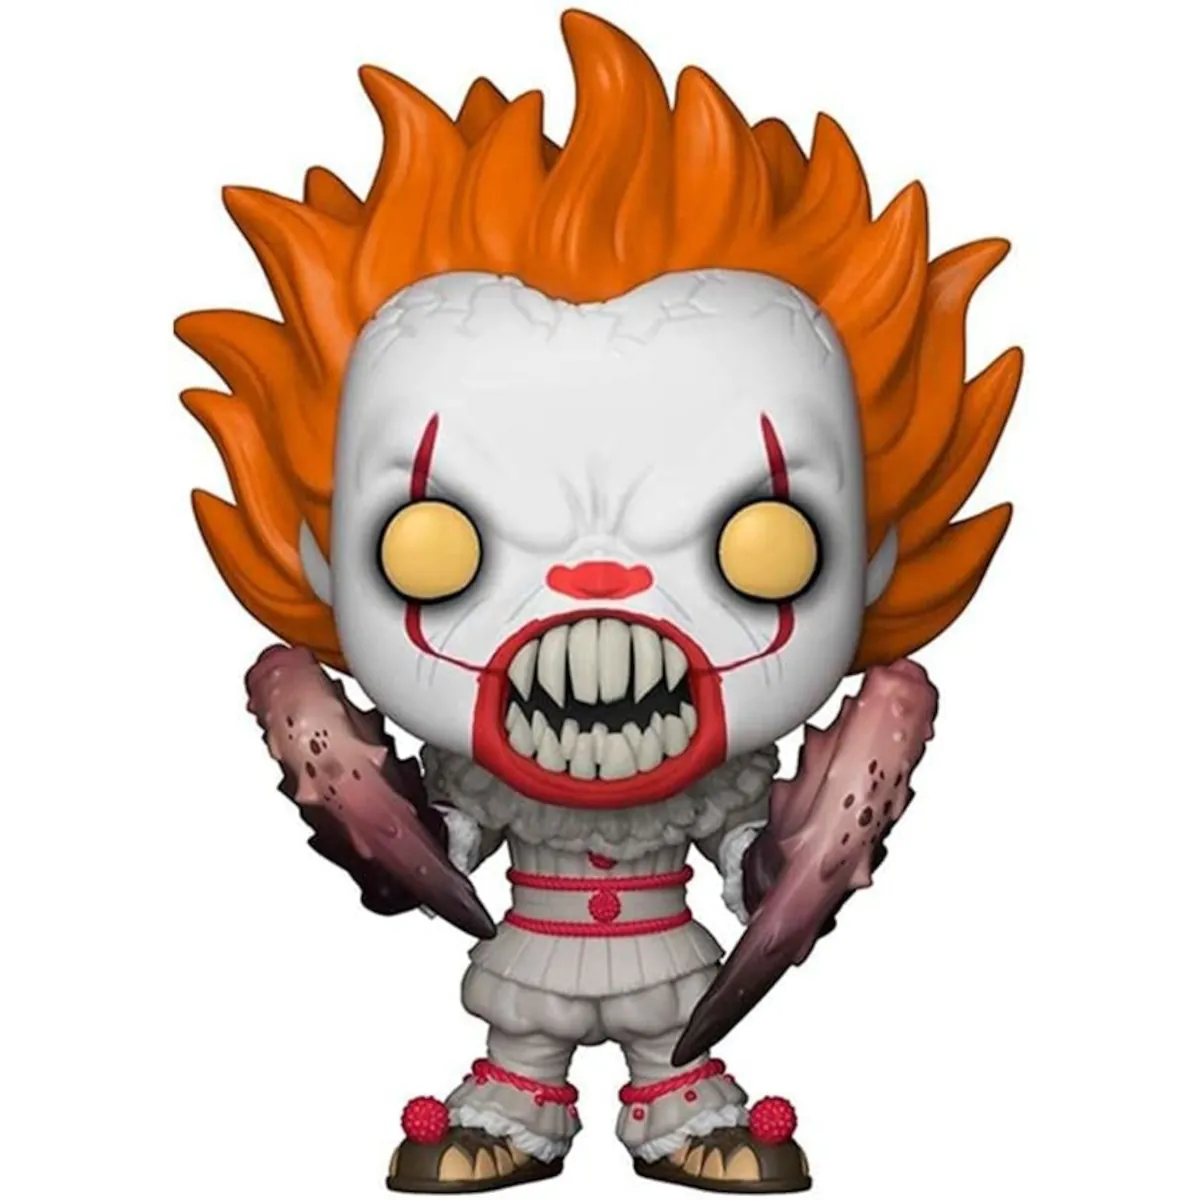 29526 Funko Pop! Movies - IT (2017) - Pennywise with Spider Legs Collectable Vinyl Figure